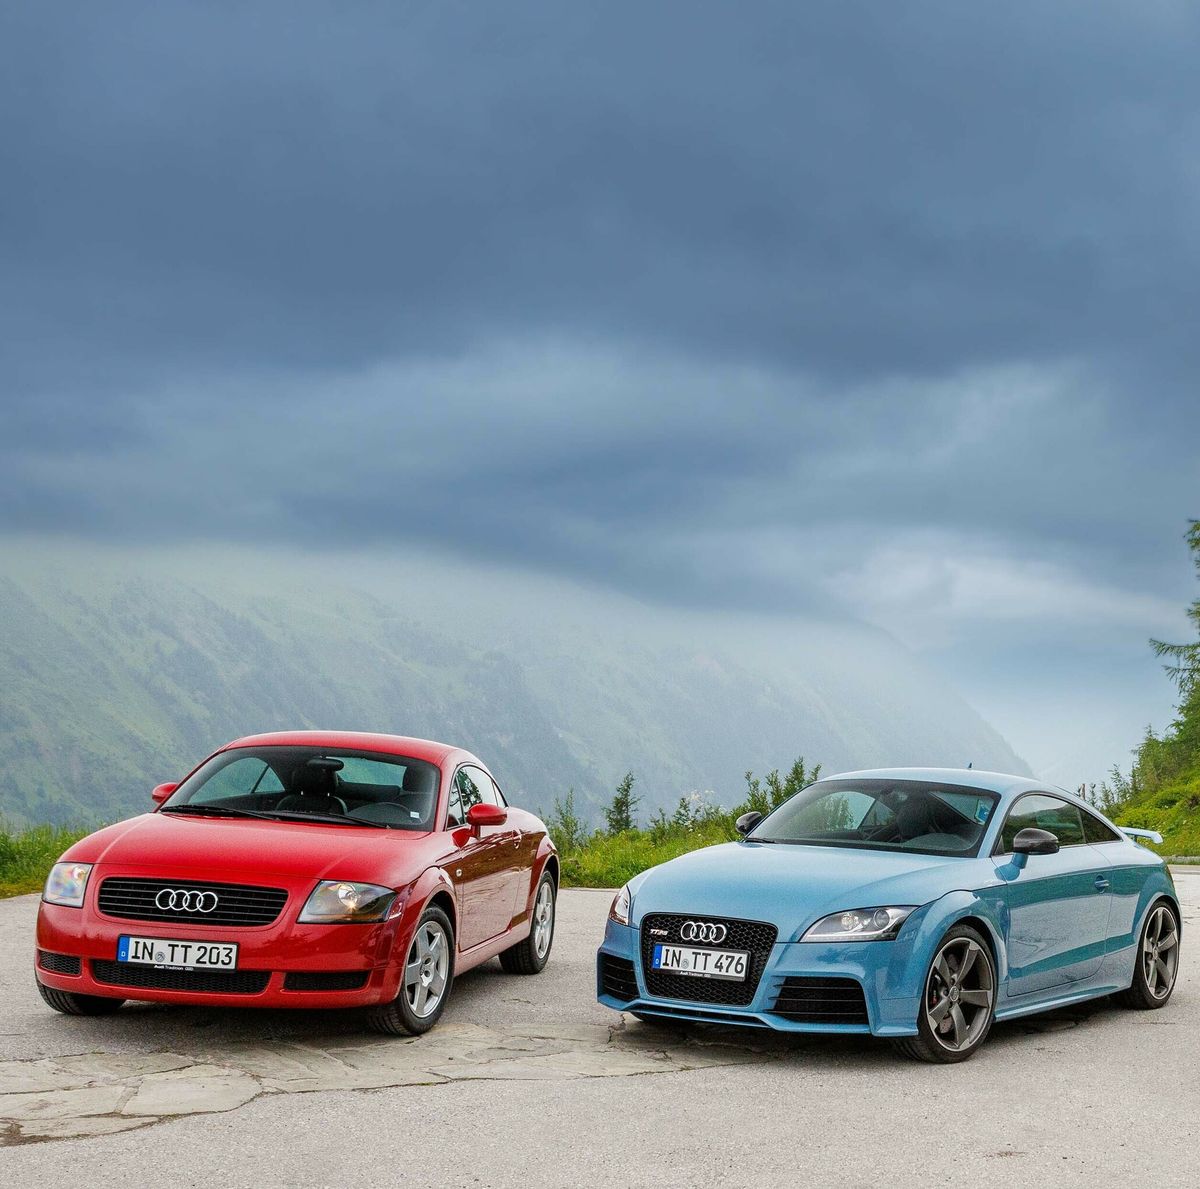 How Audi Tt Became A Design Icon